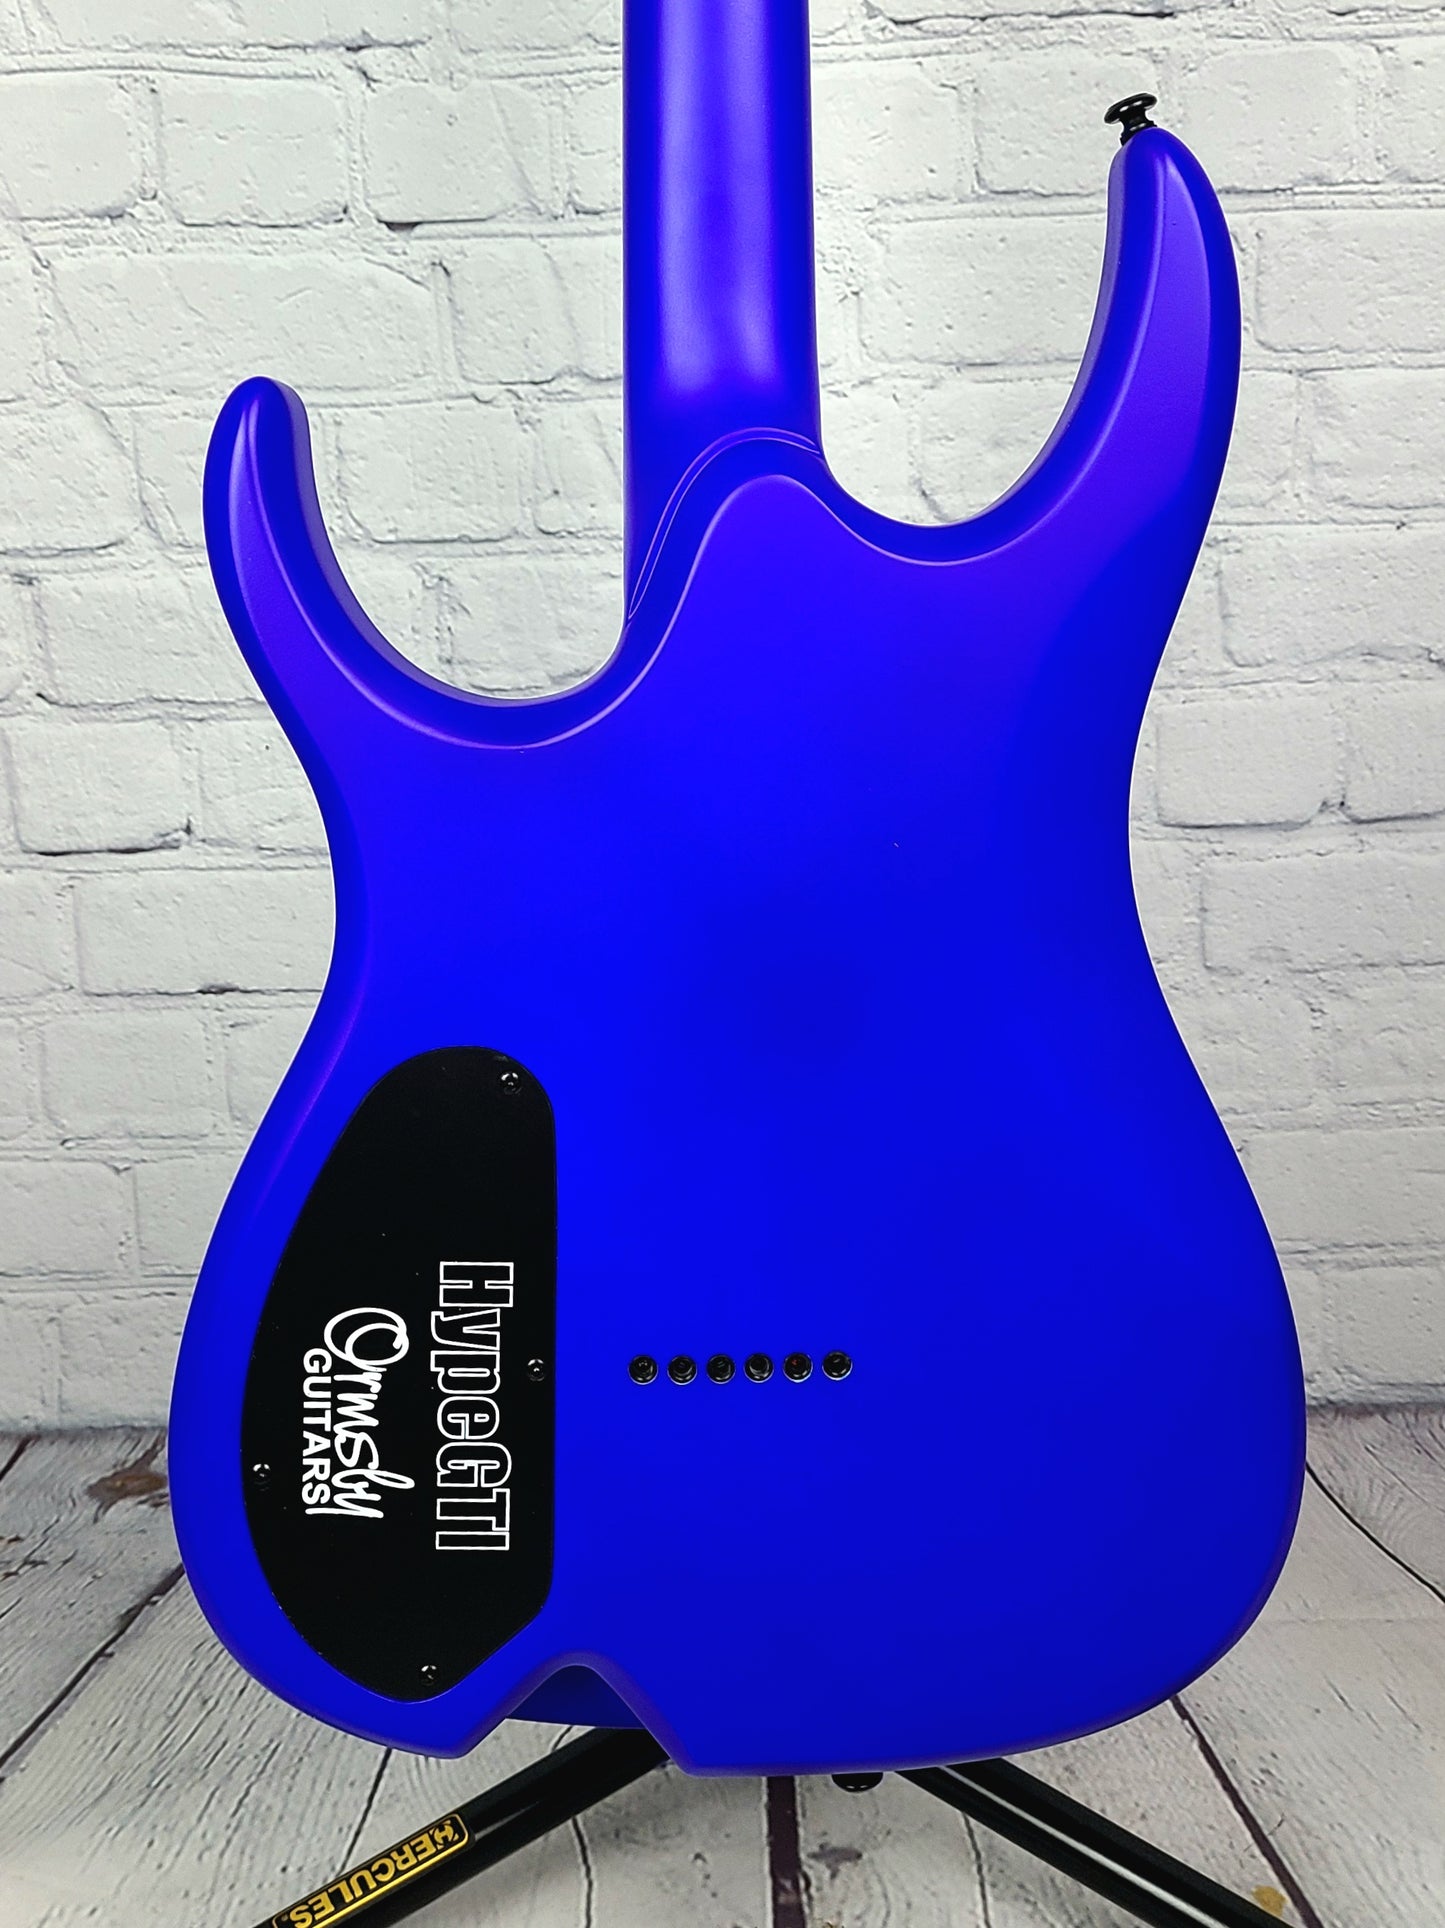 Ormsby Guitars Hype GTI 6 String Royal Blue Electric Guitar Standard Scale